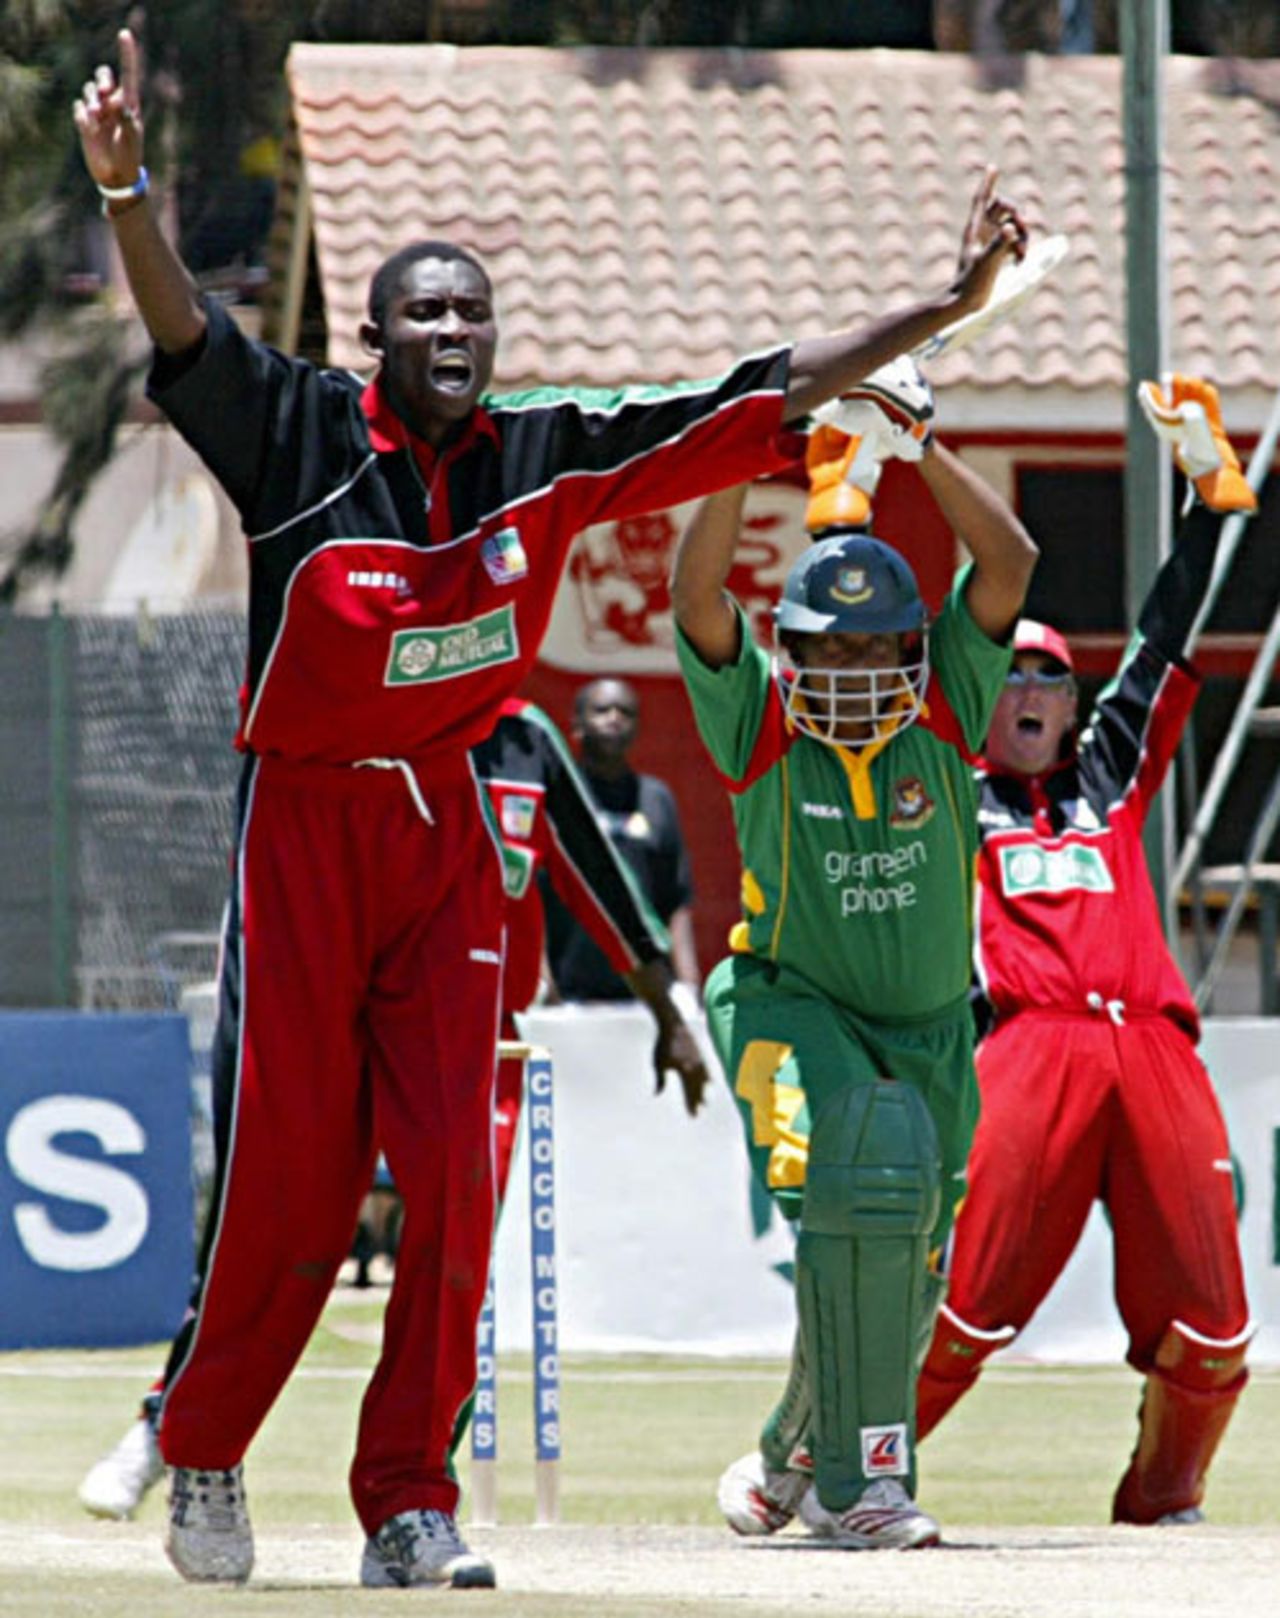 Christopher Mpofu and Brendan Taylor appeal for the wicket of Mohammad Rafique , Zimbabwe v Bangladesh, 2nd ODI, Harare, February 6, 2007